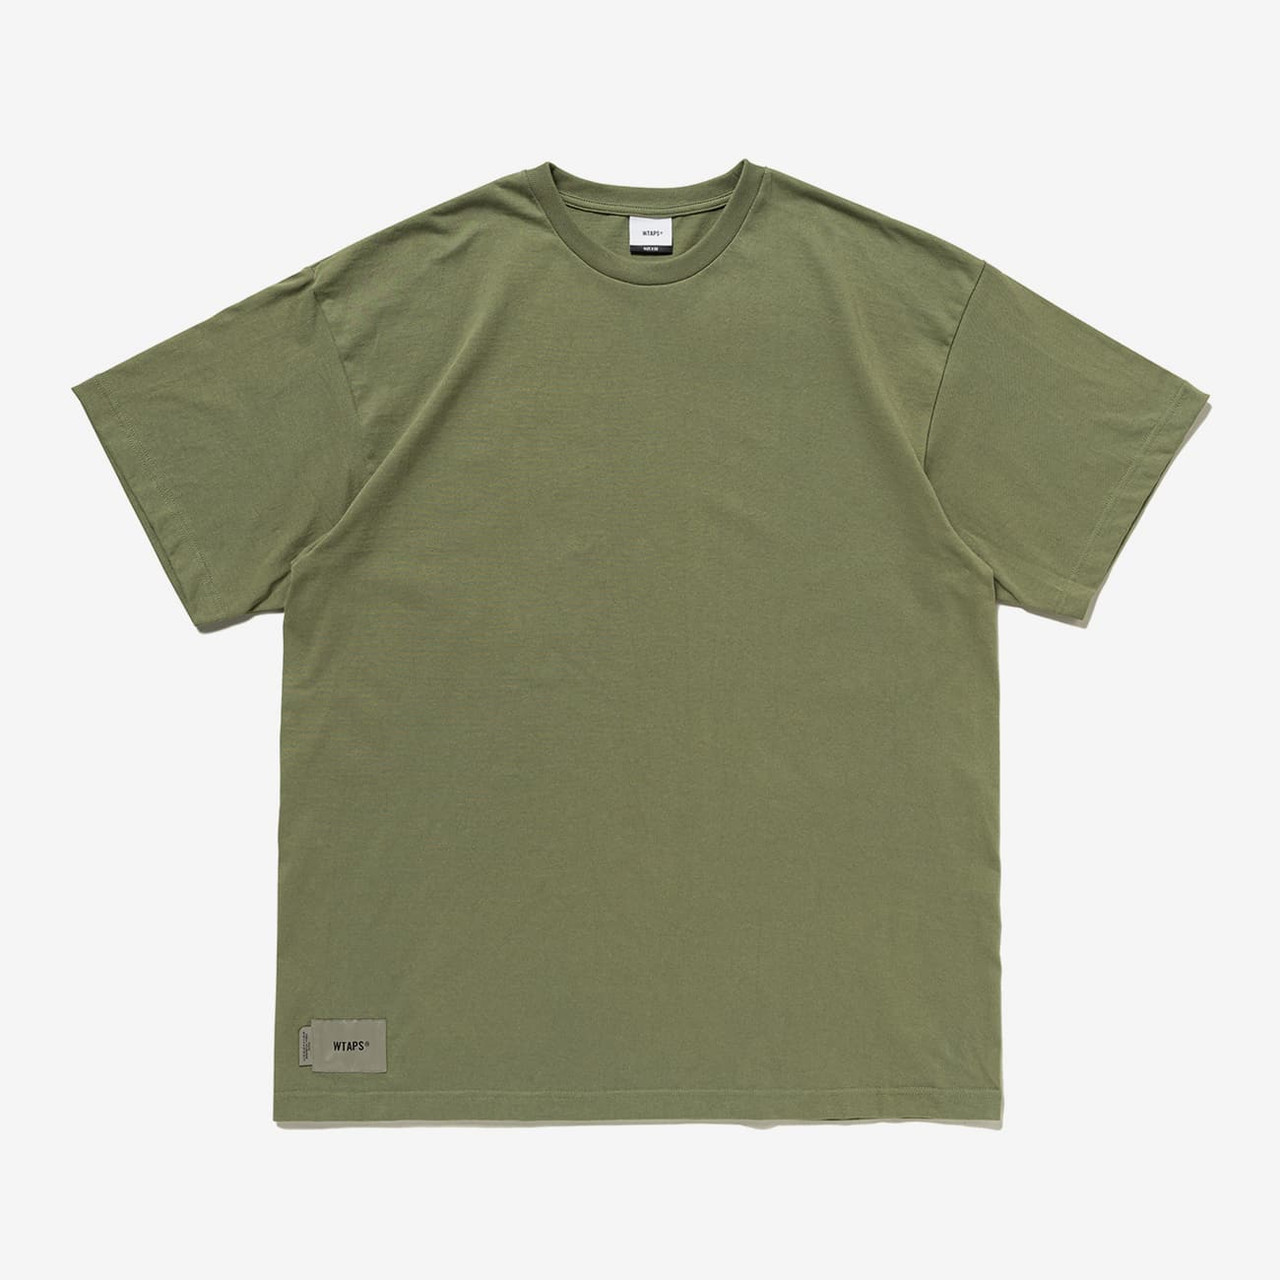 WTAPS INDUSTRY. DESIGN SS 04 TEE. COPO M - Tシャツ/カットソー(半袖 ...